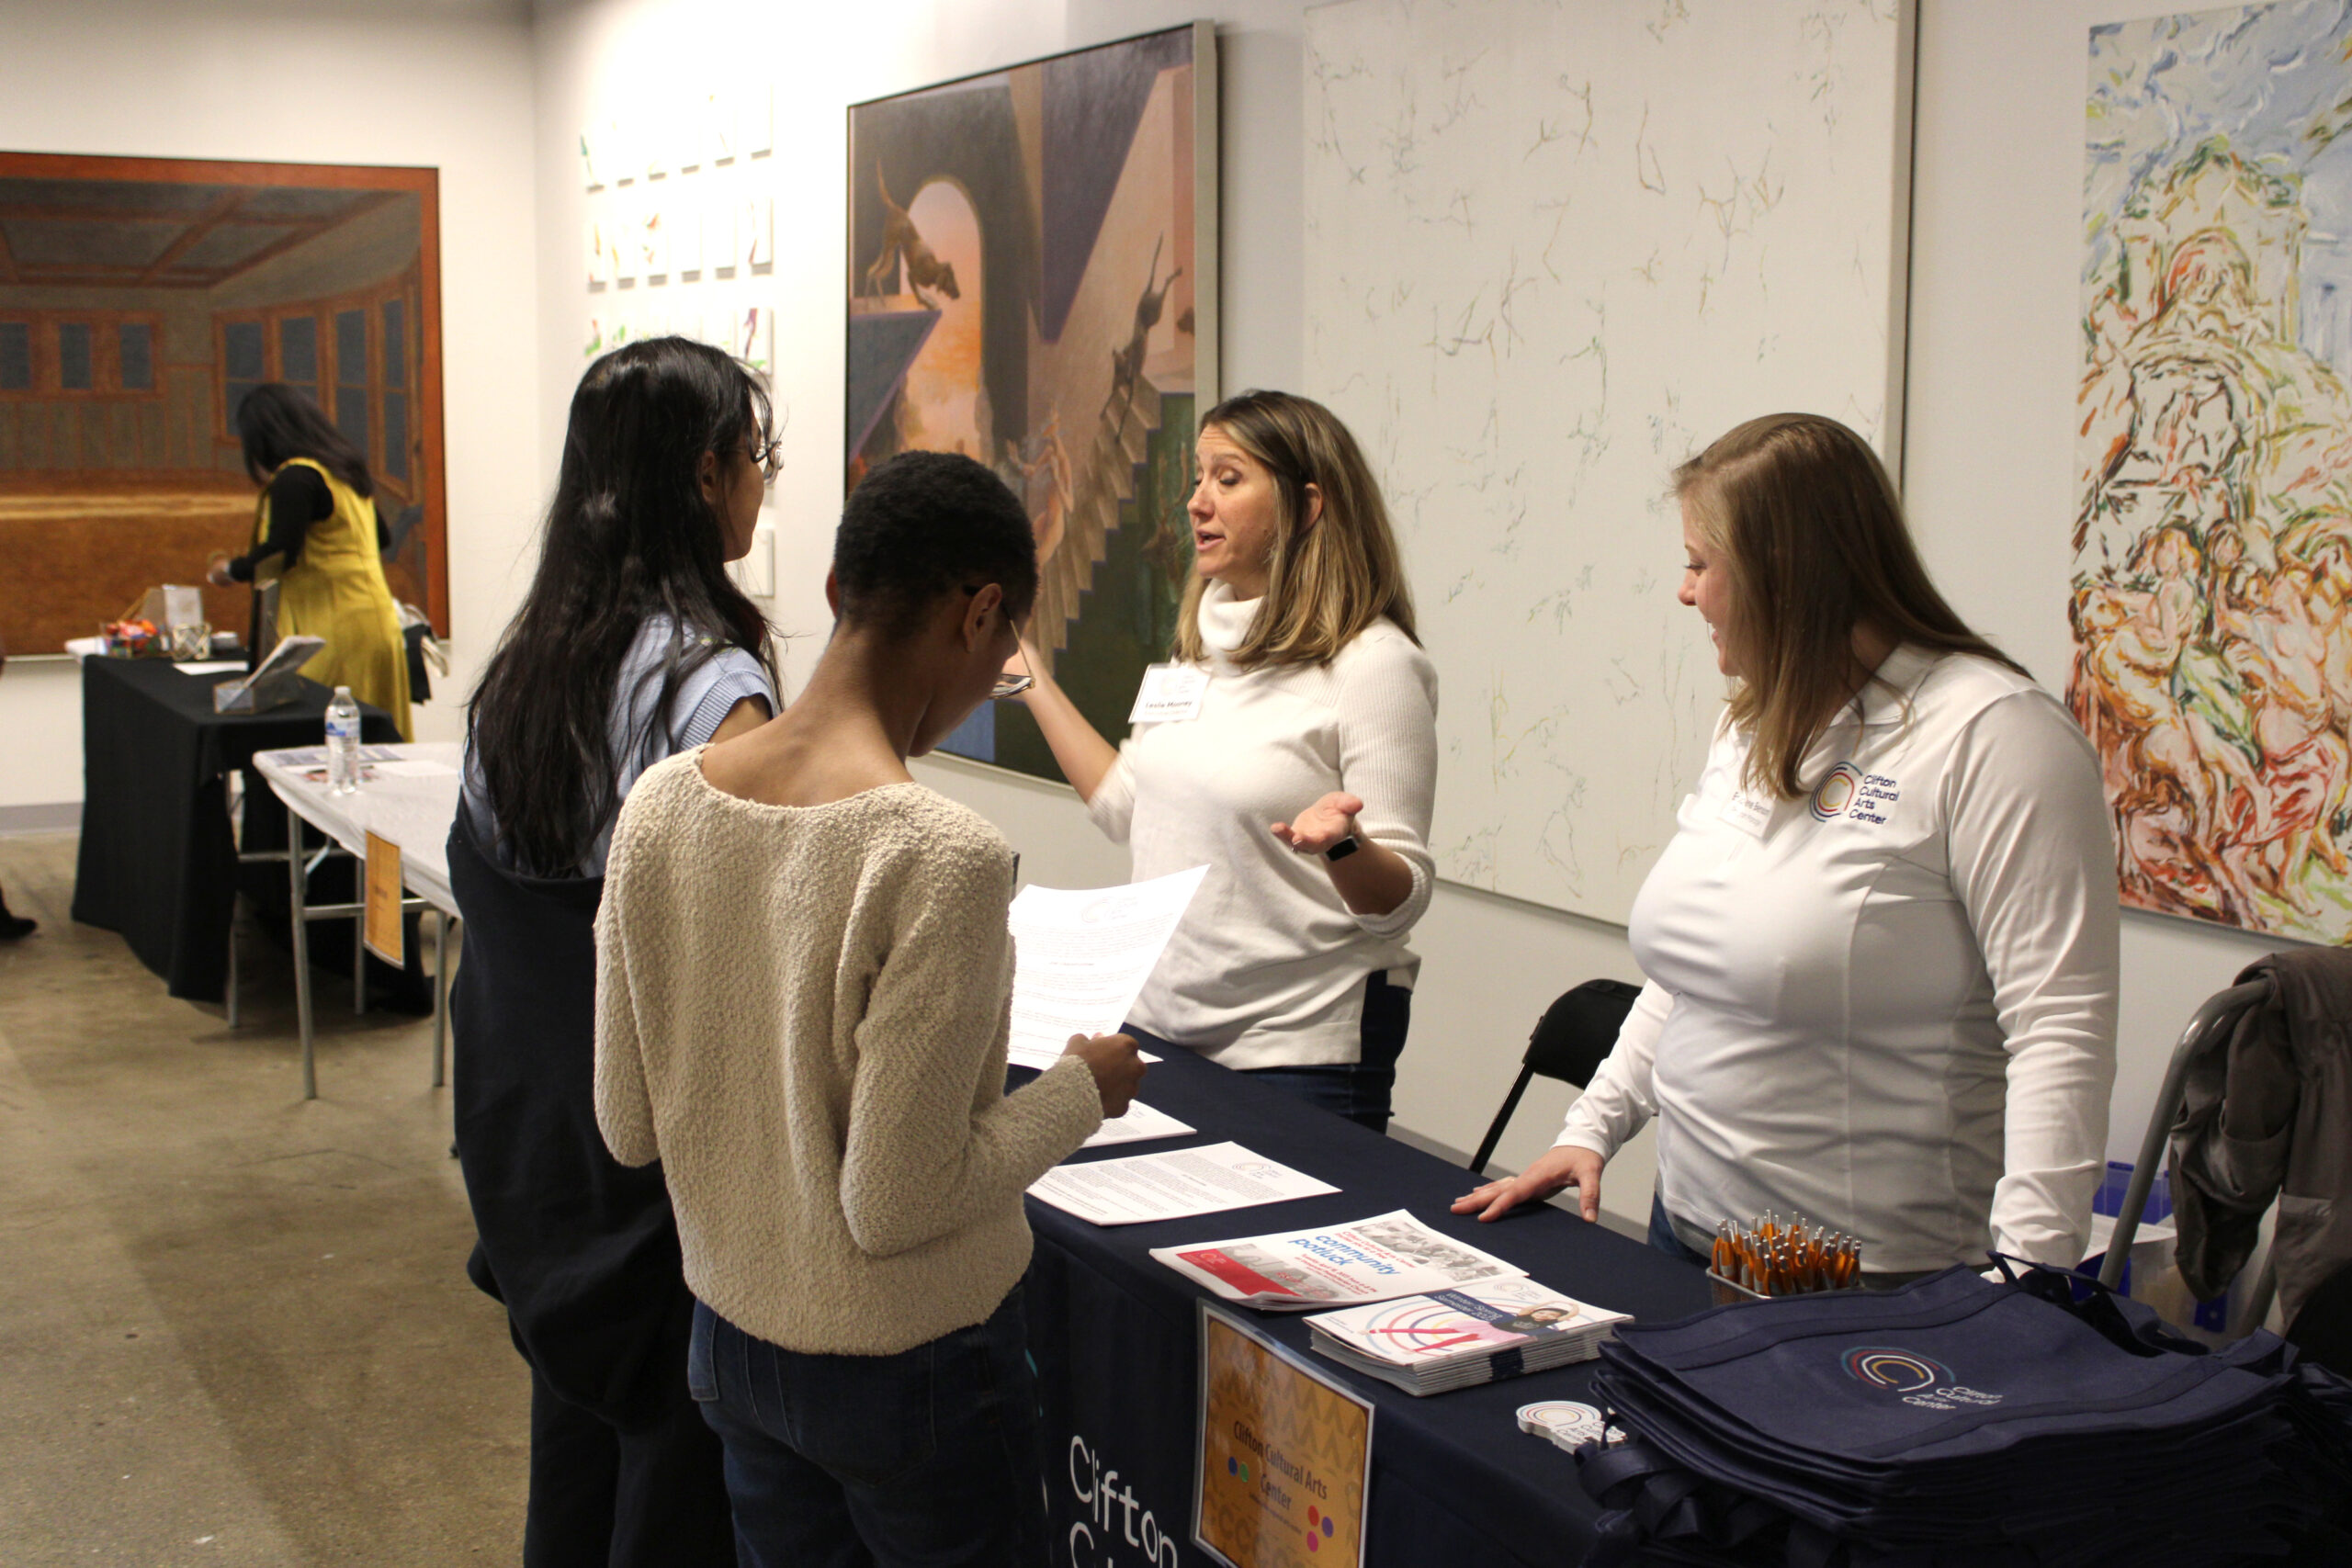 Two students get information from prospective employers at the Spring 2023 Career Fair in SITE1212 at the Art Academy of Cincinnati.